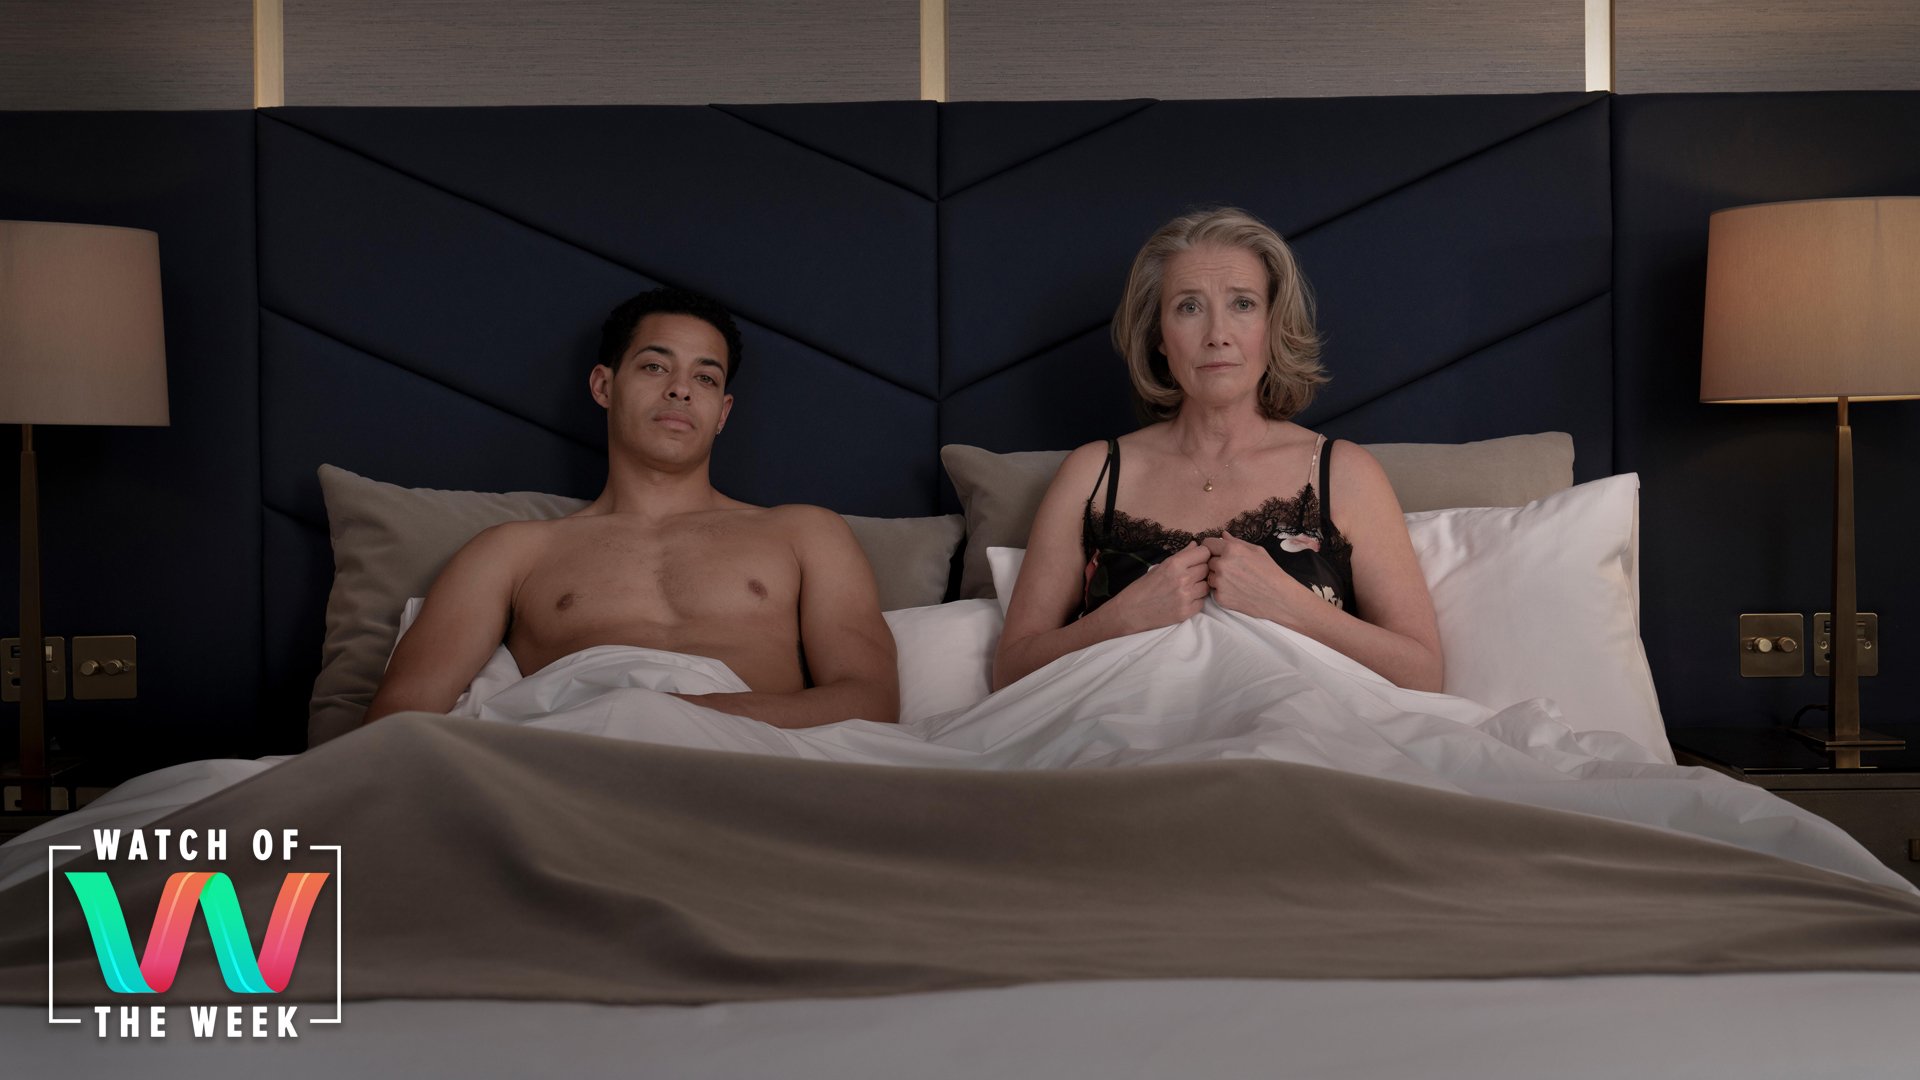 A man and woman in their underwear sit in a hotel bed with the covers pulled up, looking at the camera.